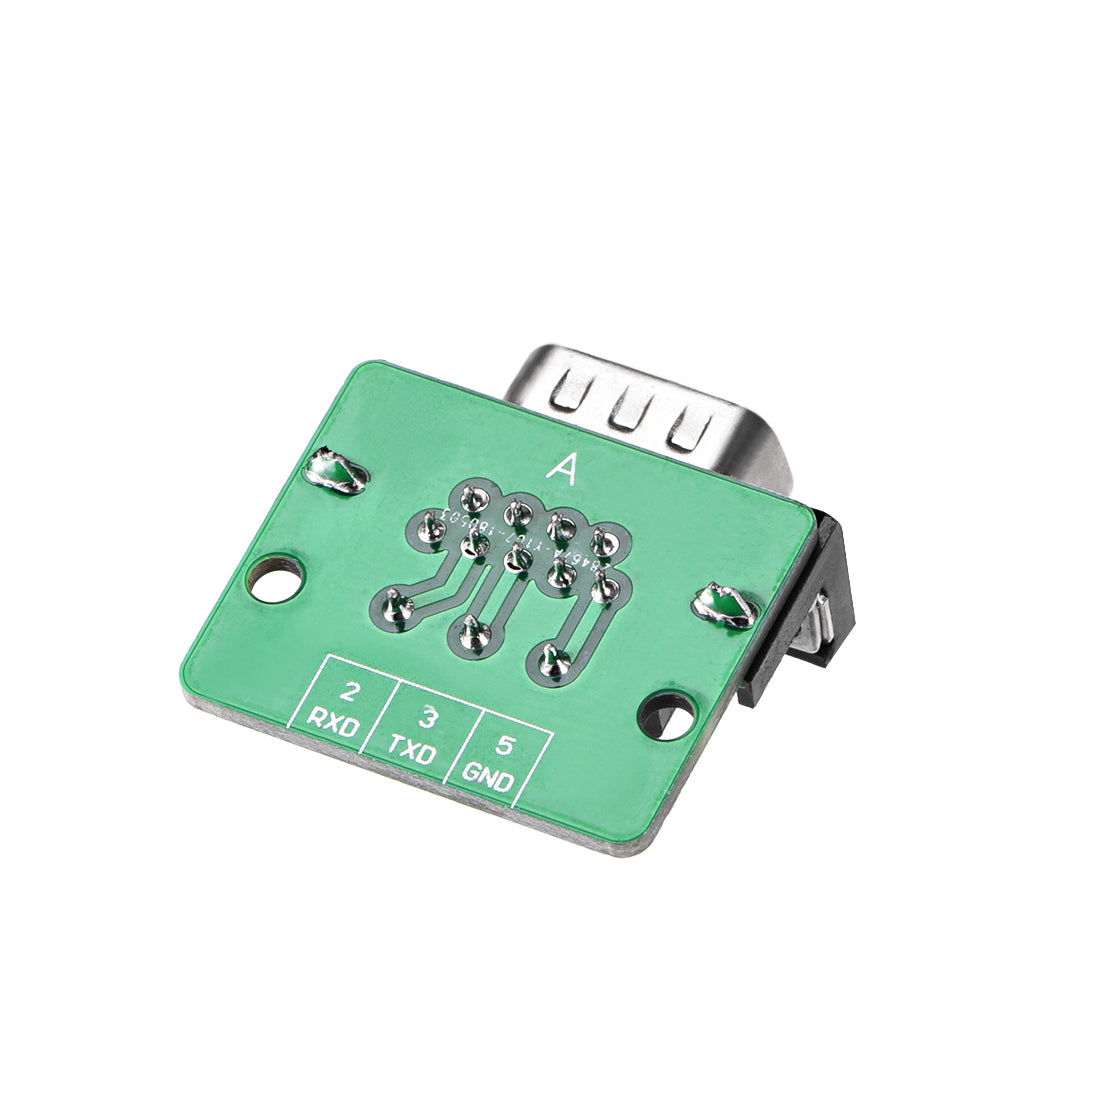 uxcell Uxcell D-sub DB9 Breakout Board Connector 9 Pin 2 Row Male Port Solderless Terminal Block Adapter